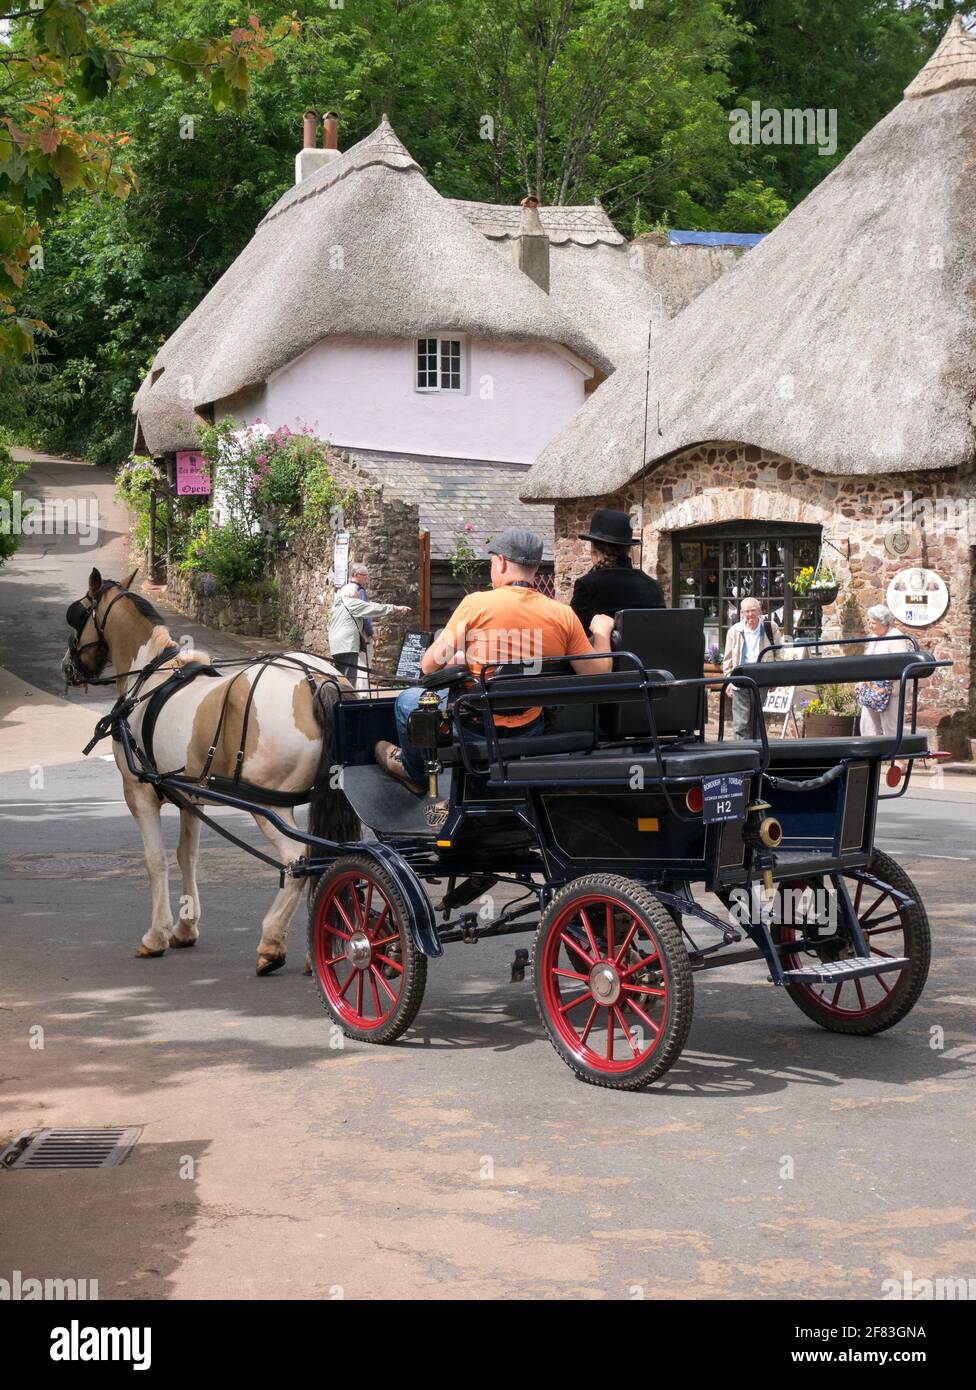 The Picturesque Thatched Village of Cockington with its Thatched Cottages and Horse Drawn Rides, Cockington, Torquay, Devon, England, UK Stock Photo